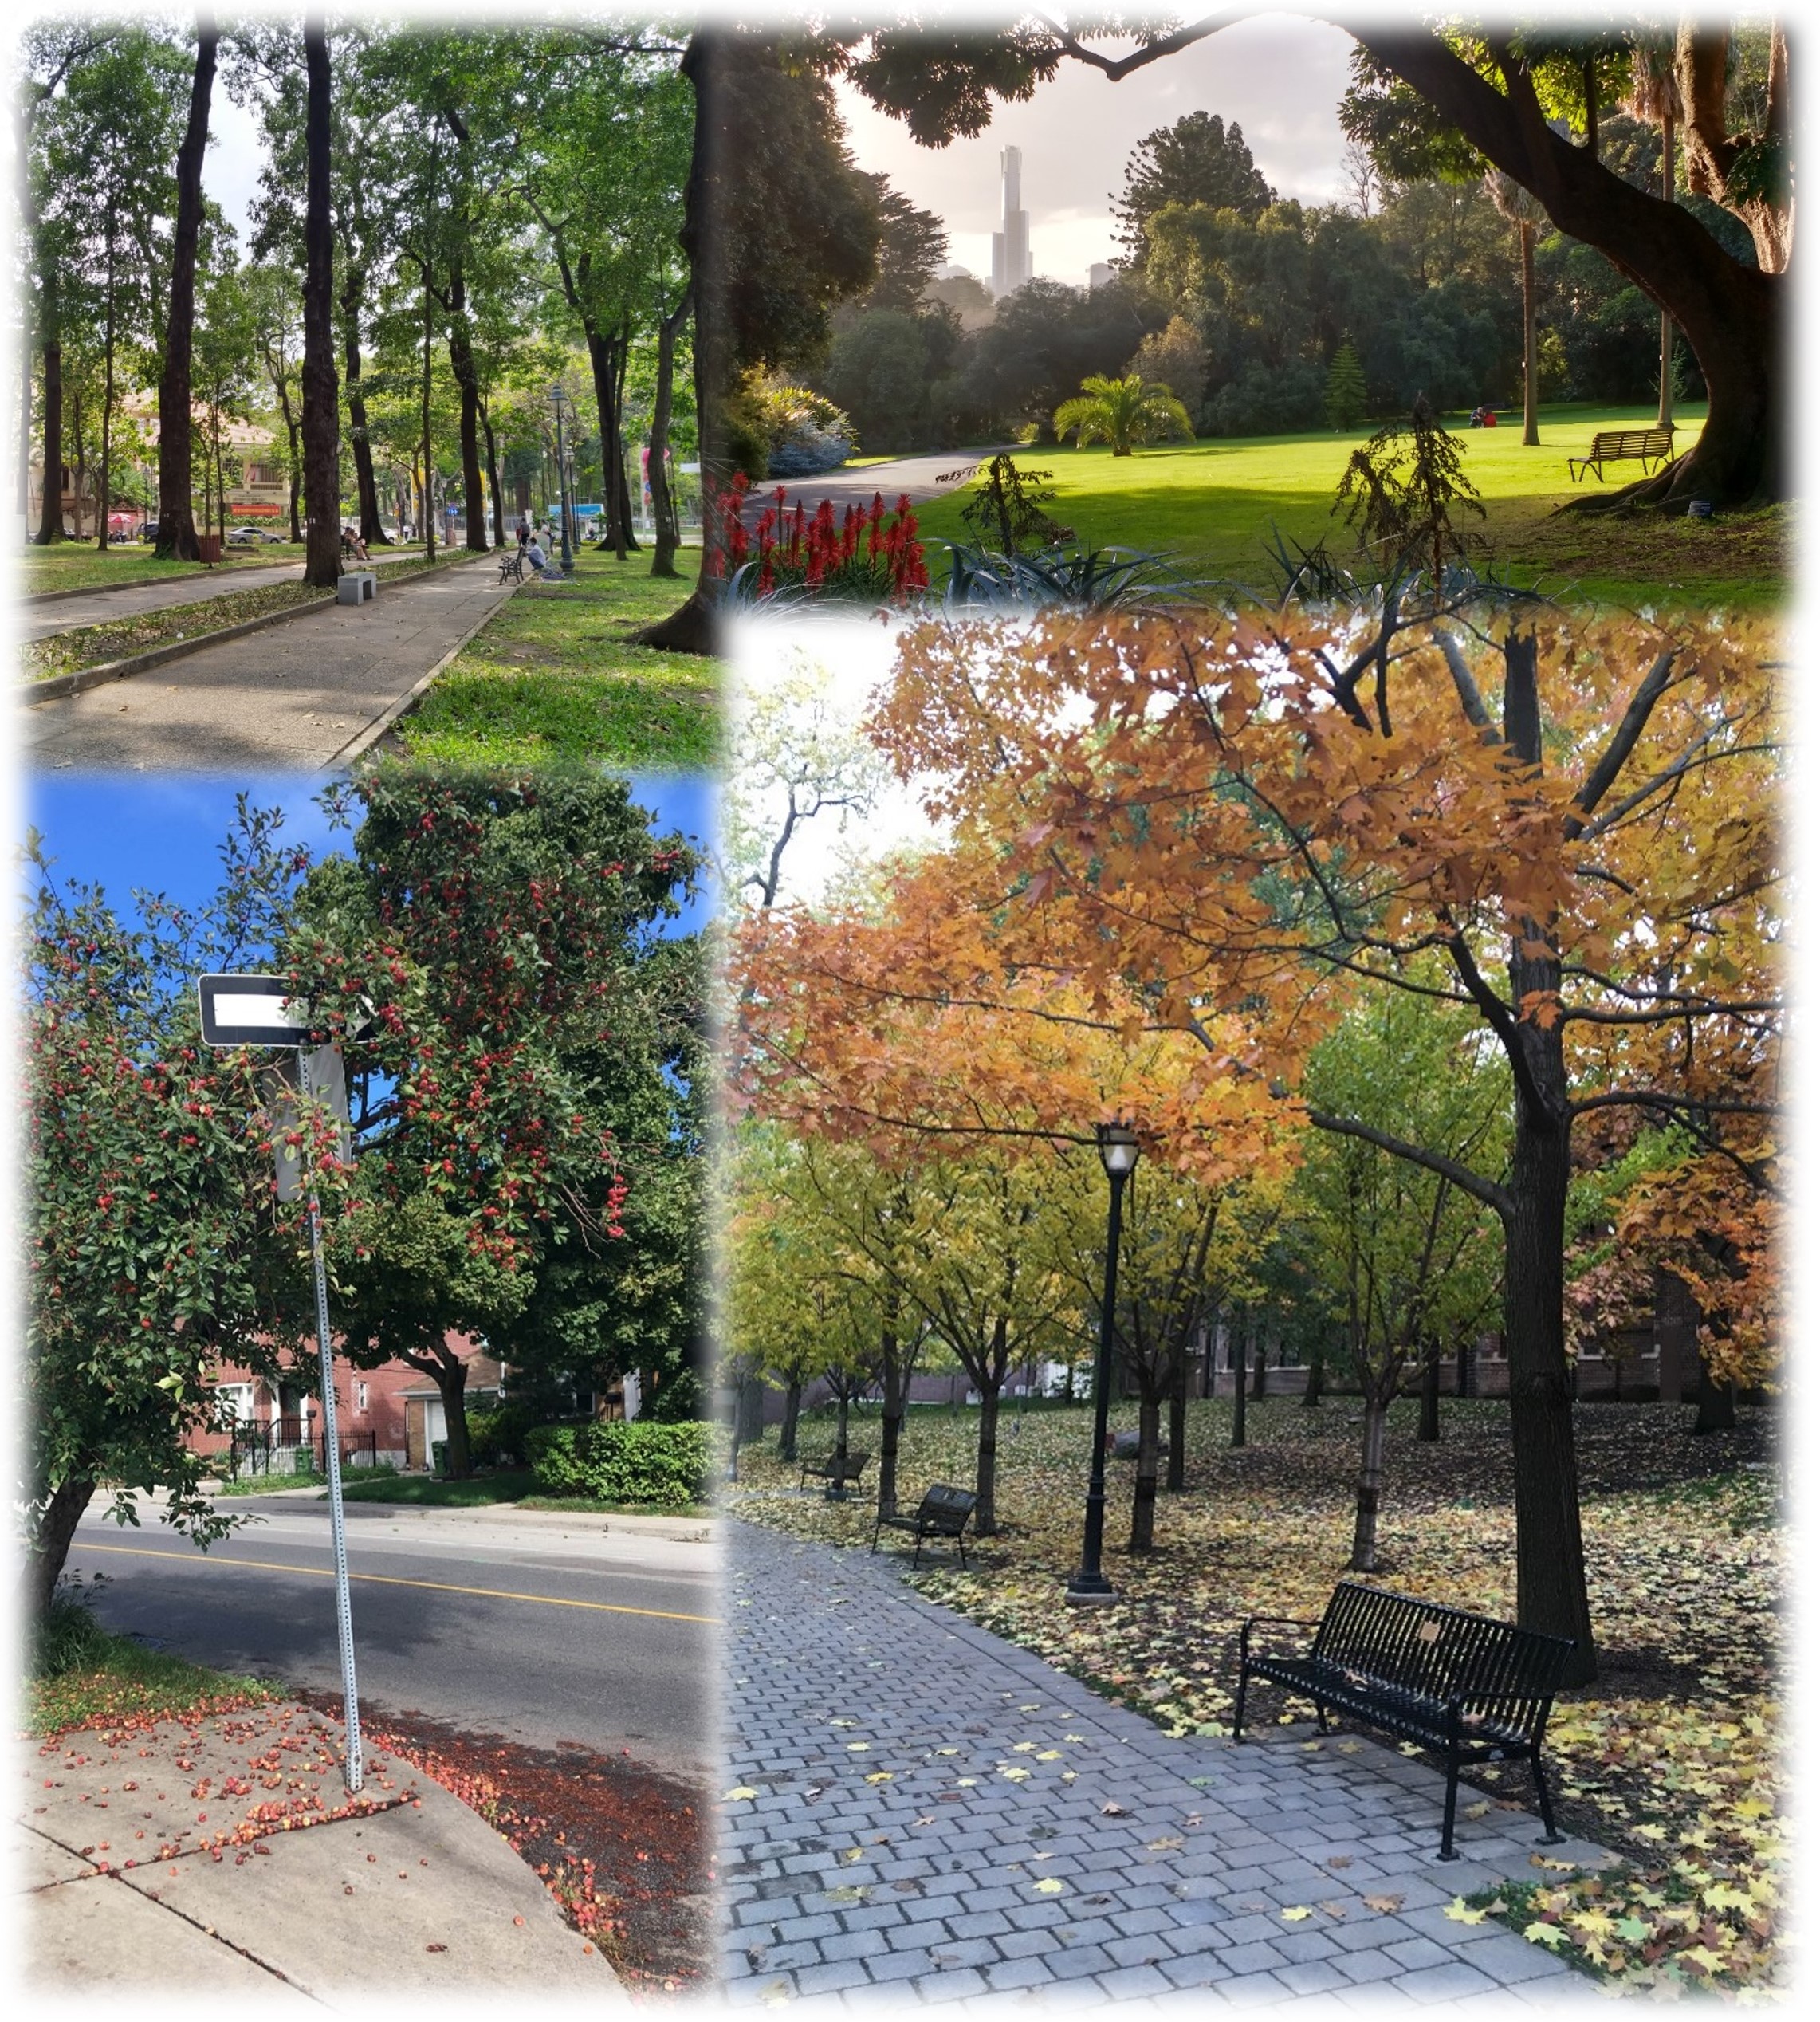 Four pictures of trees in different seasons and areas along some type of path or road